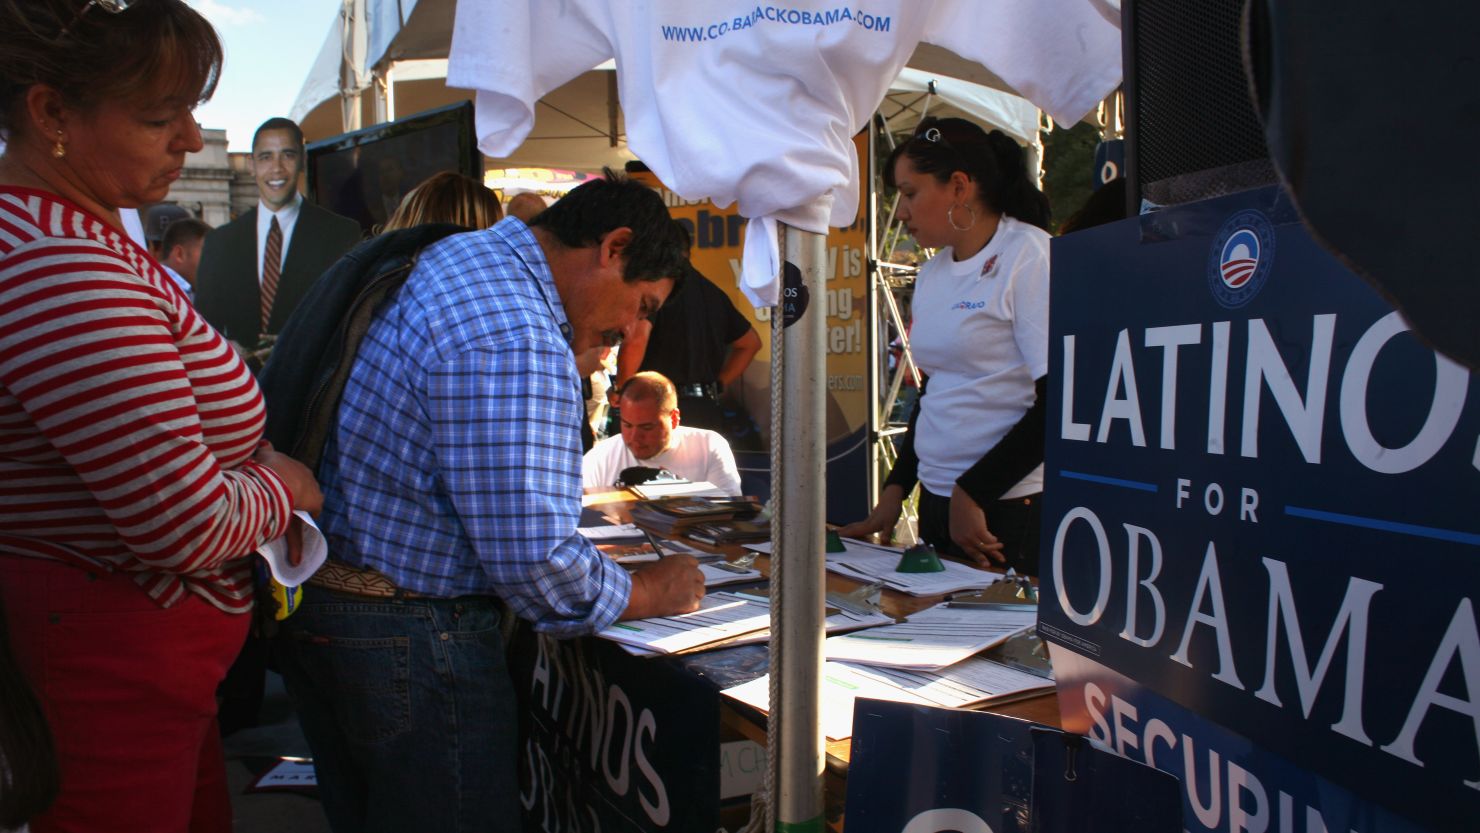 Latinos turned out to support Barack Obama in 2008.